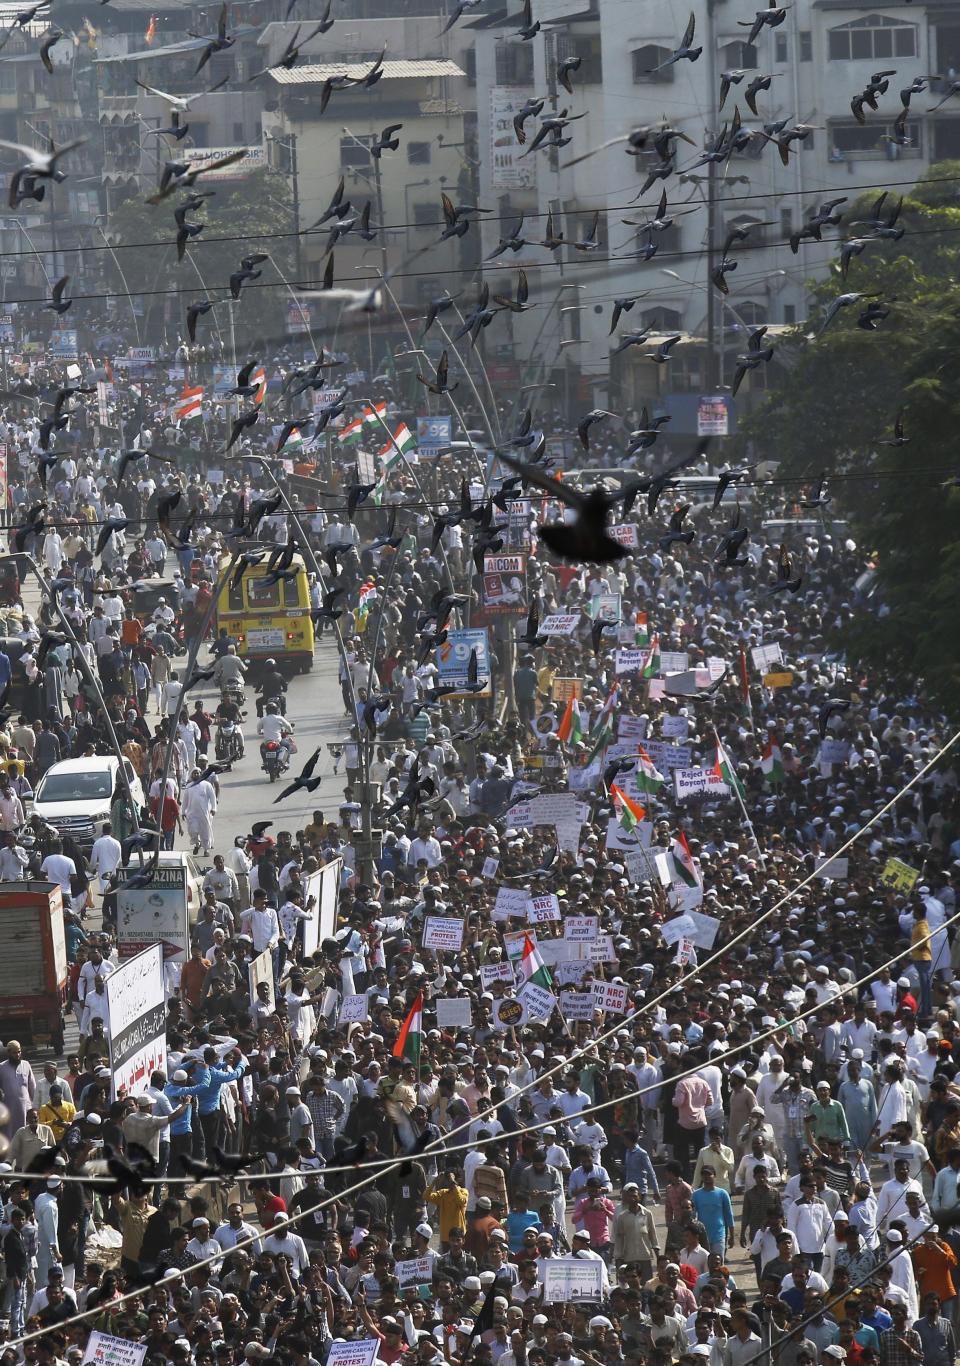 Pigeons fly past as Indians march during a protest against the Citizenship Act in Mumbai, India, Wednesday, Dec. 18, 2019. India's Supreme Court on Wednesday postponed hearing pleas challenging the constitutionality of the new citizenship law that has sparked opposition and massive protests across the country. (AP Photo/Rajanish Kakade)